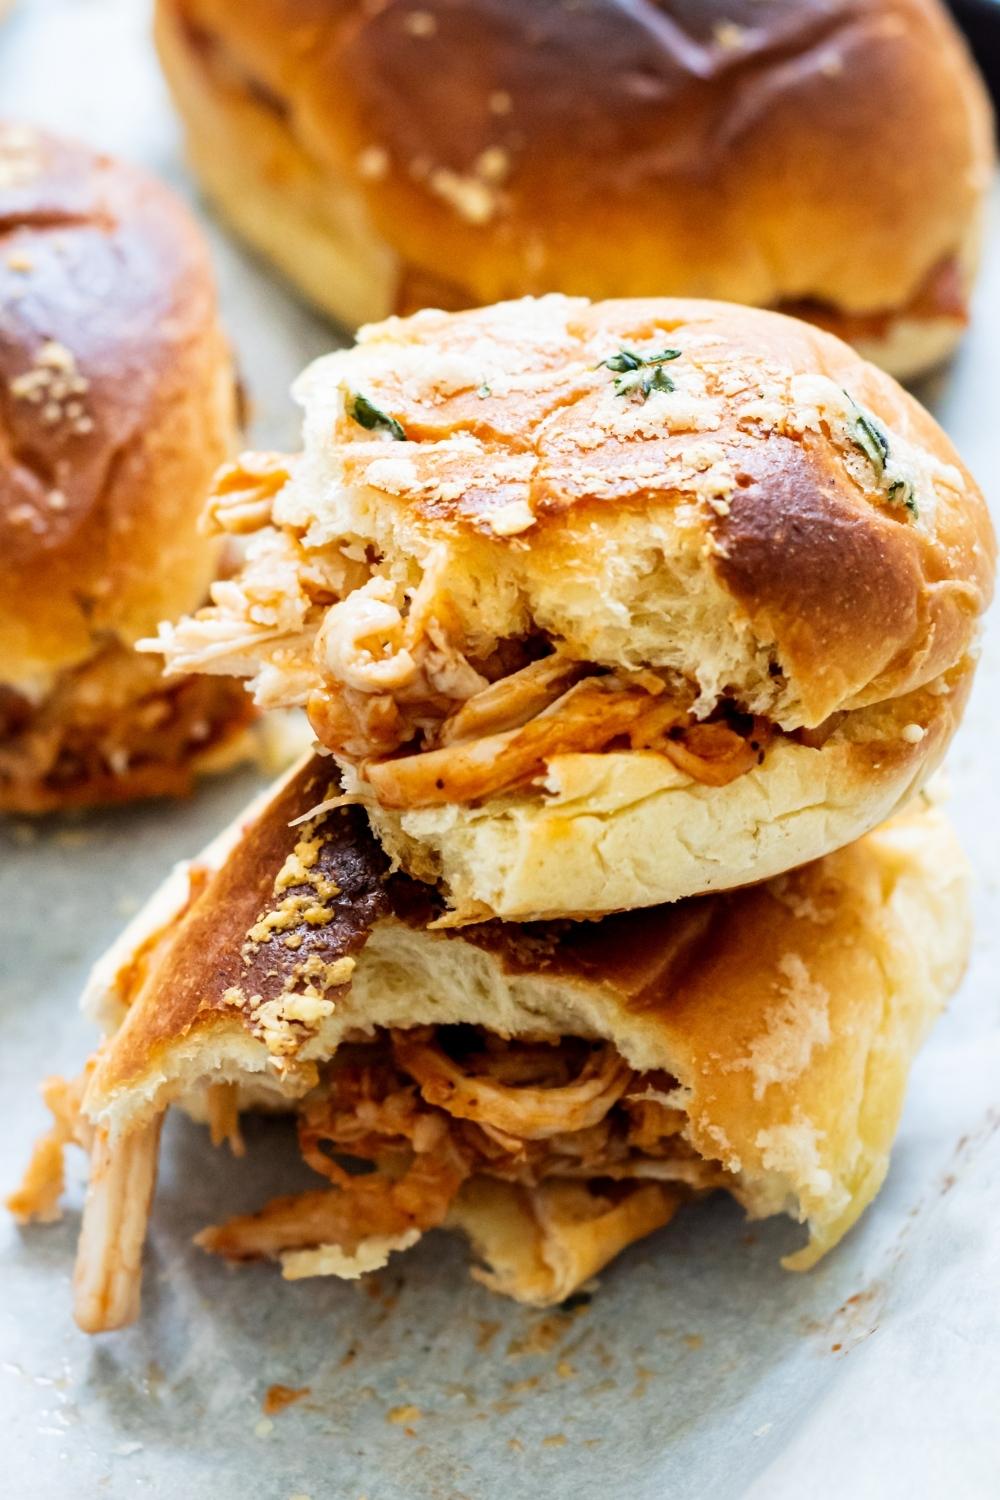 A close-up of a barbecue chicken slider that has been cut in half to reveal the barbecue chicken between the roll.